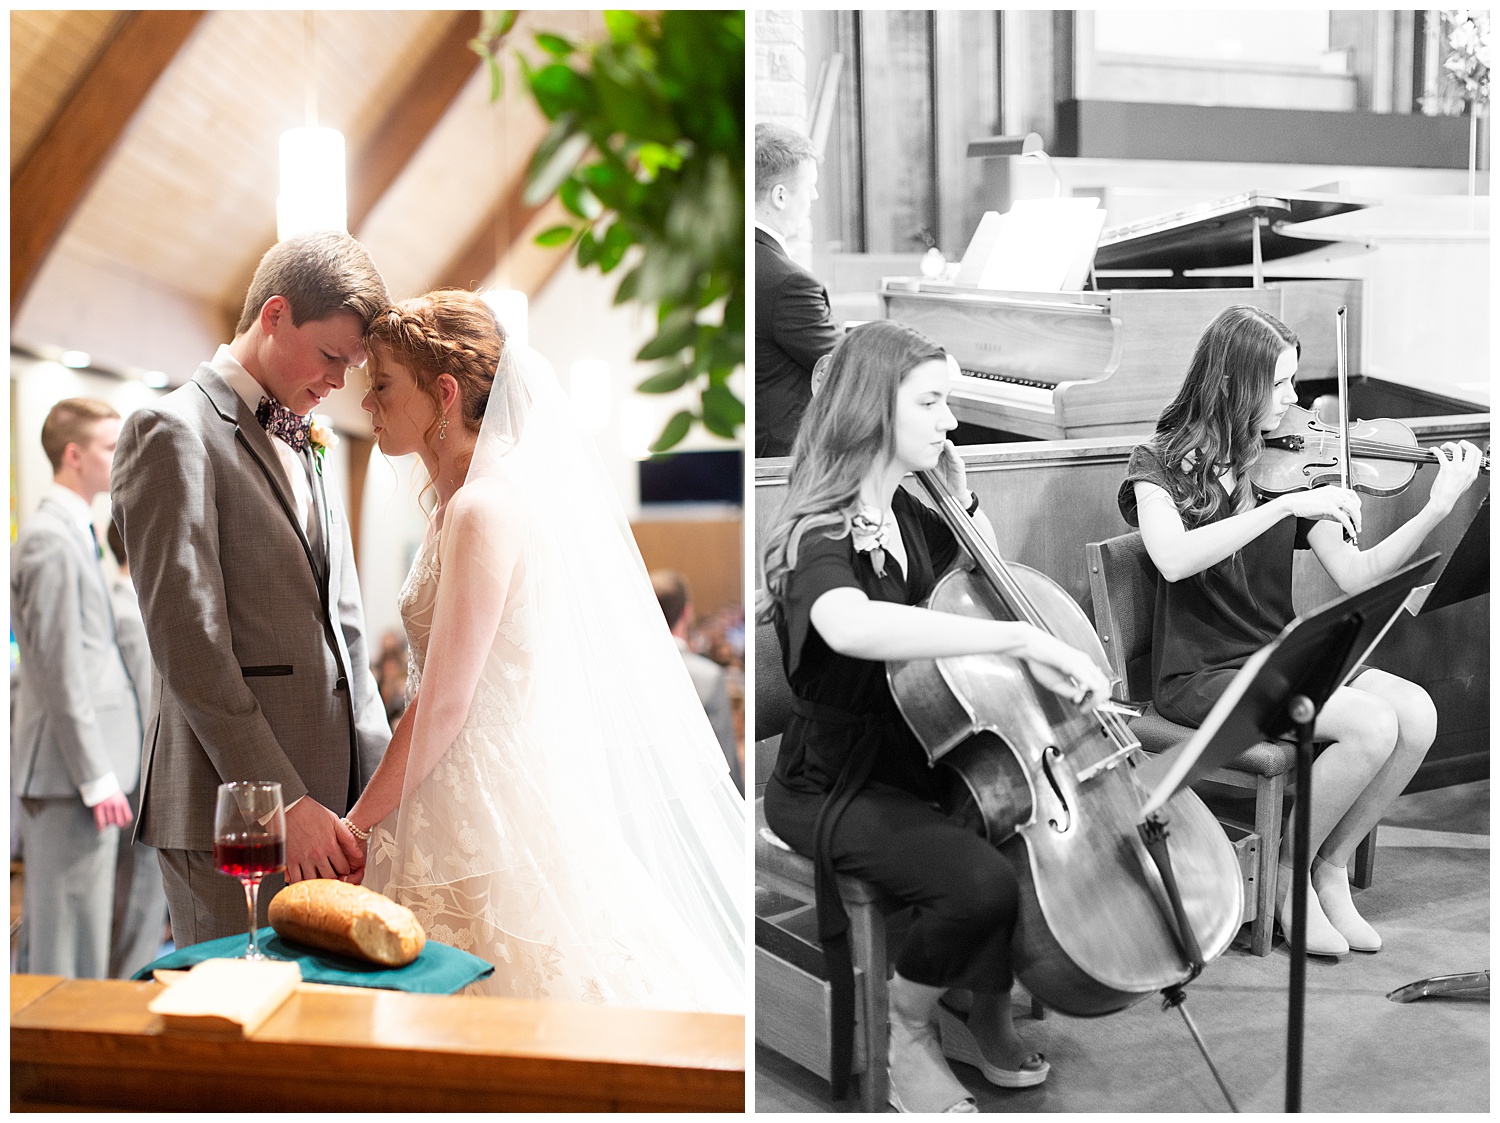 Live string instruments during a rainy spring wedding day.